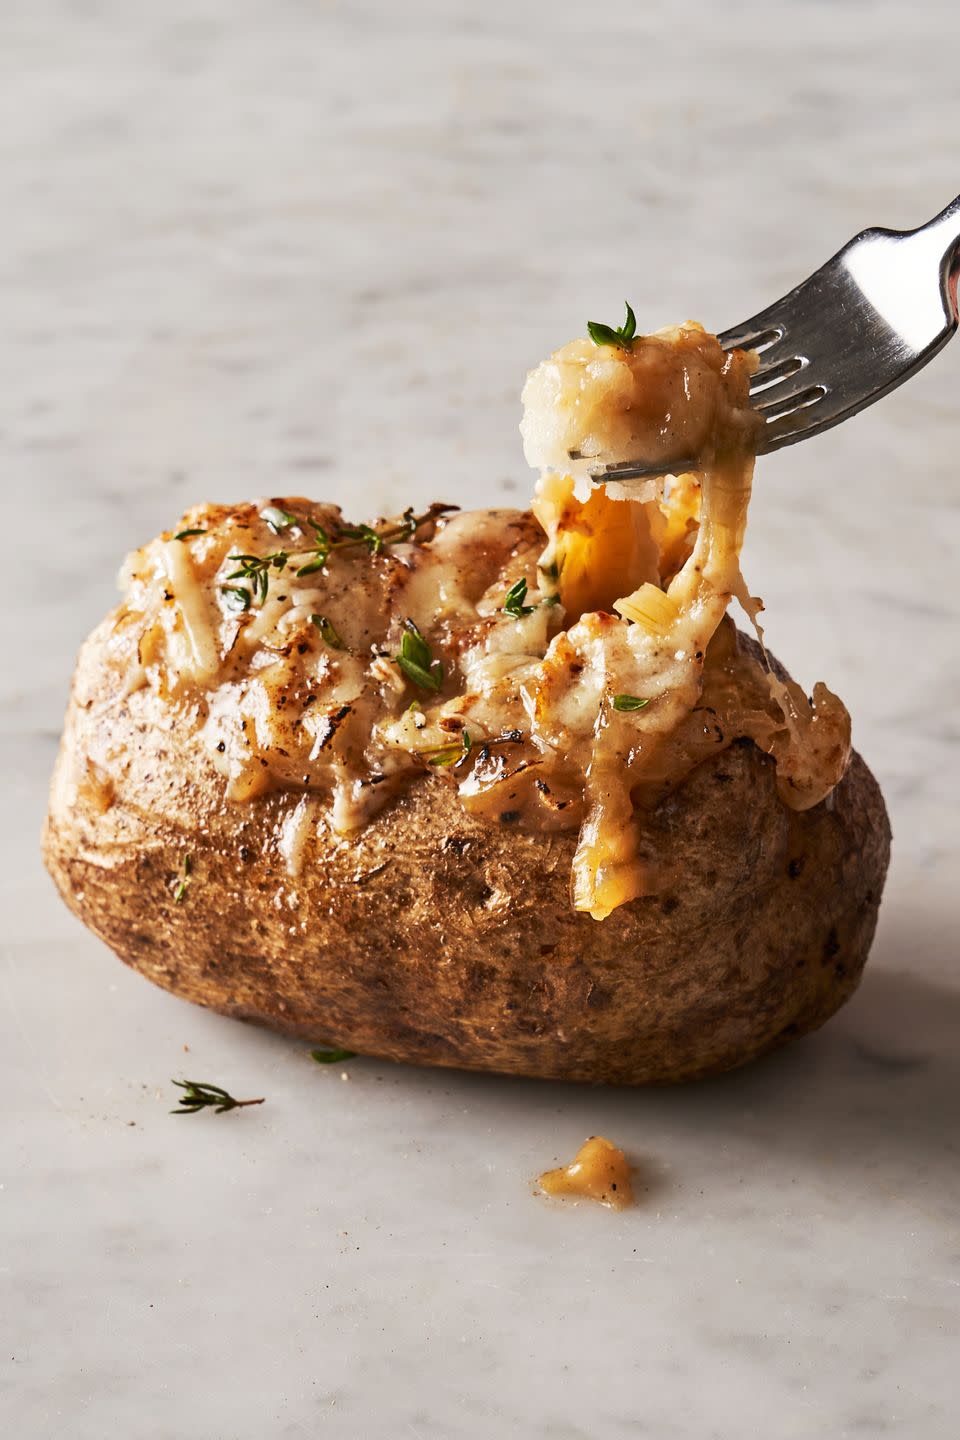 16) French Onion Baked Potatoes